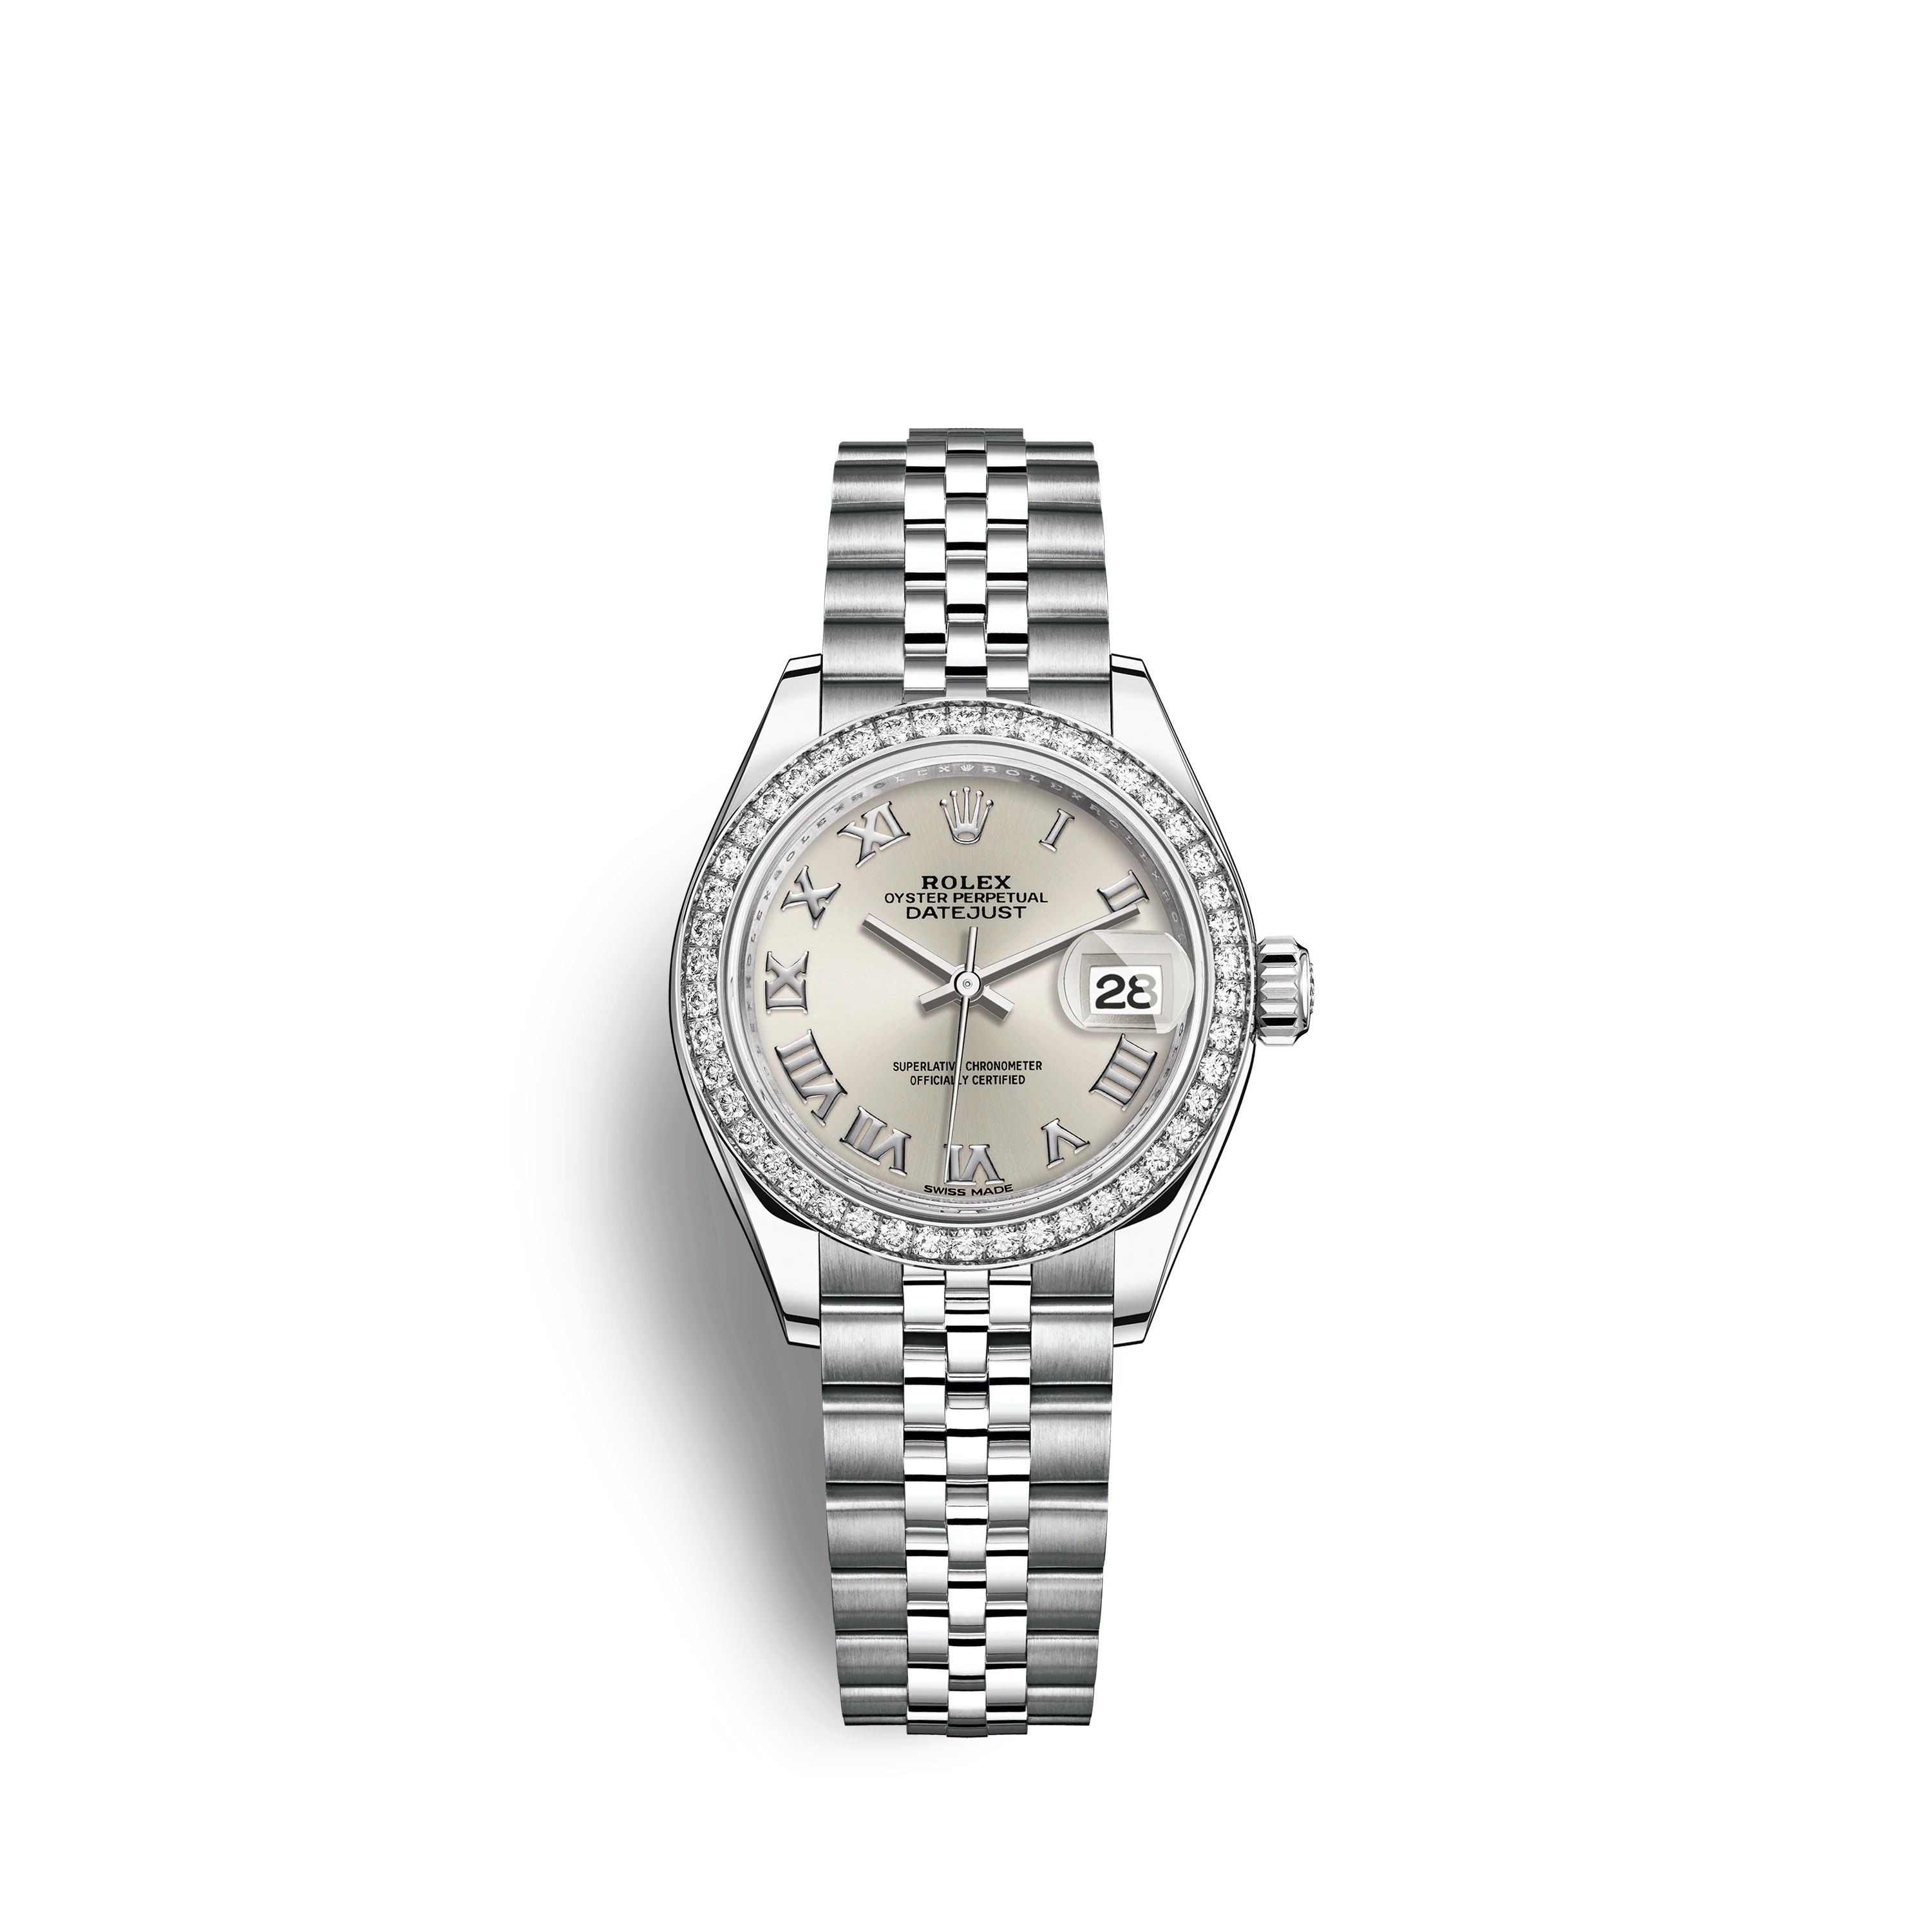 Lady-Datejust 28 279384RBR White Gold & Stainles Steel Watch (Silver)